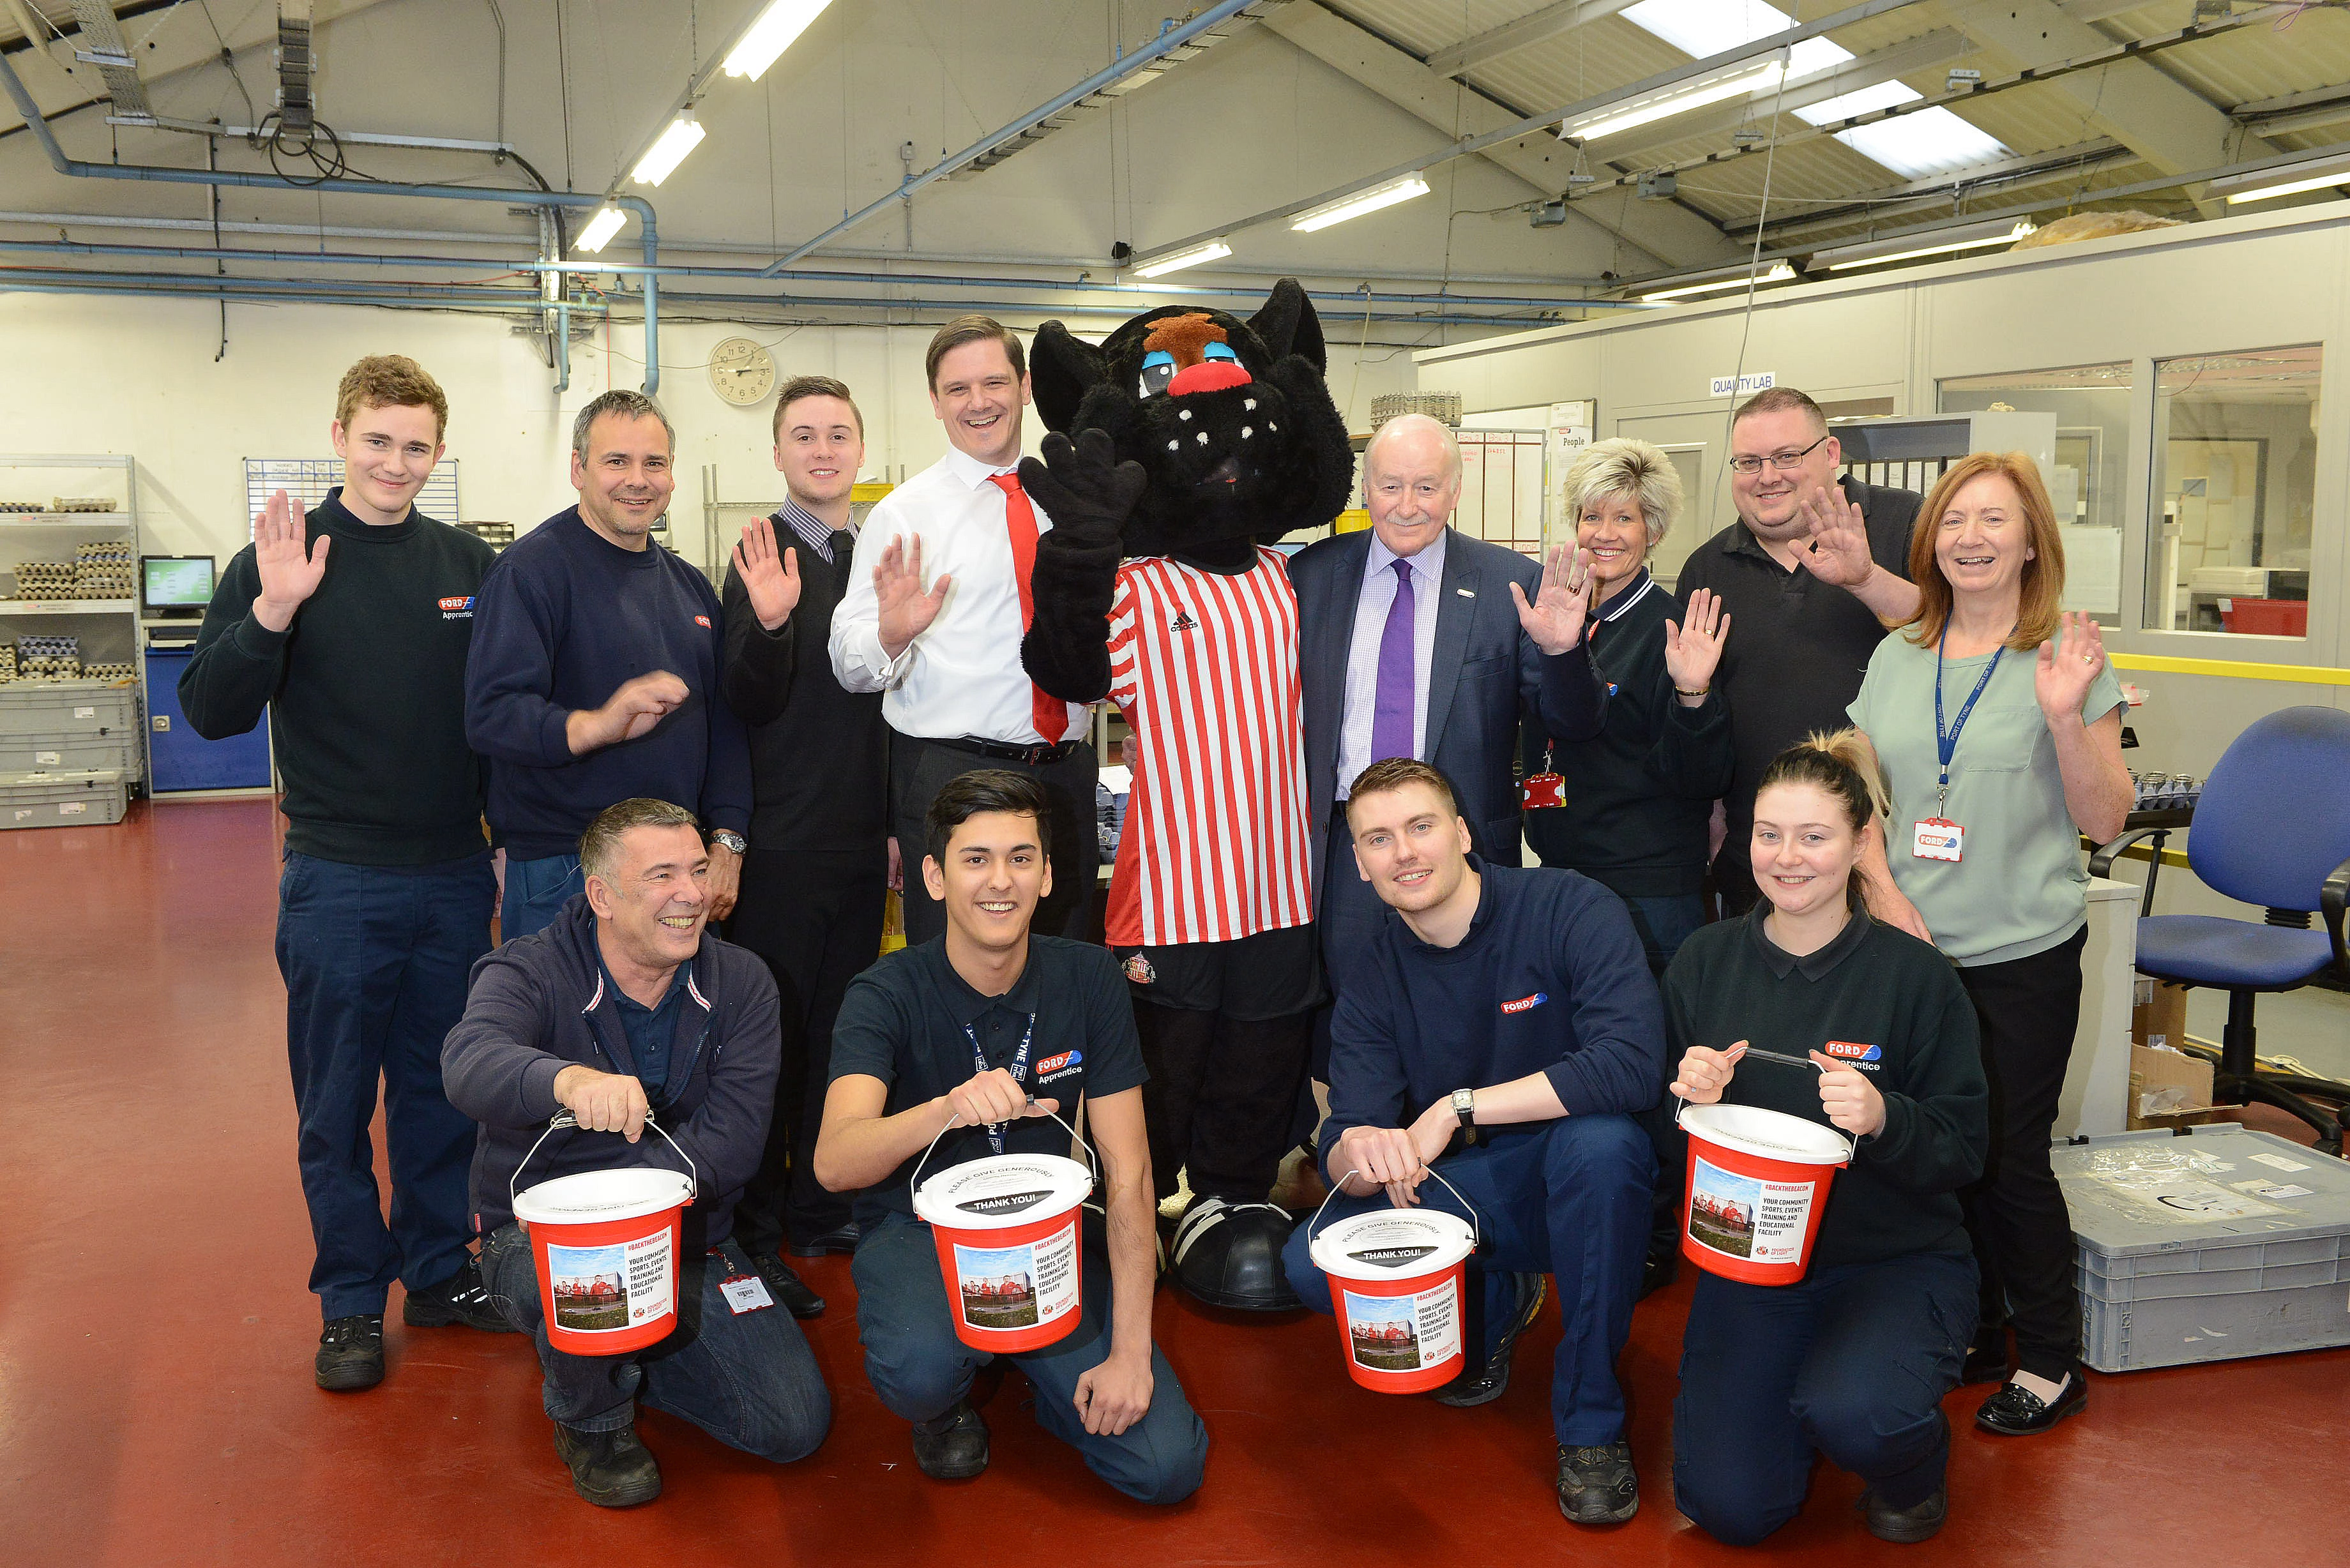 Geoff Ford alongside workers, the Foundation's James Burman and SAFC mascot Samson